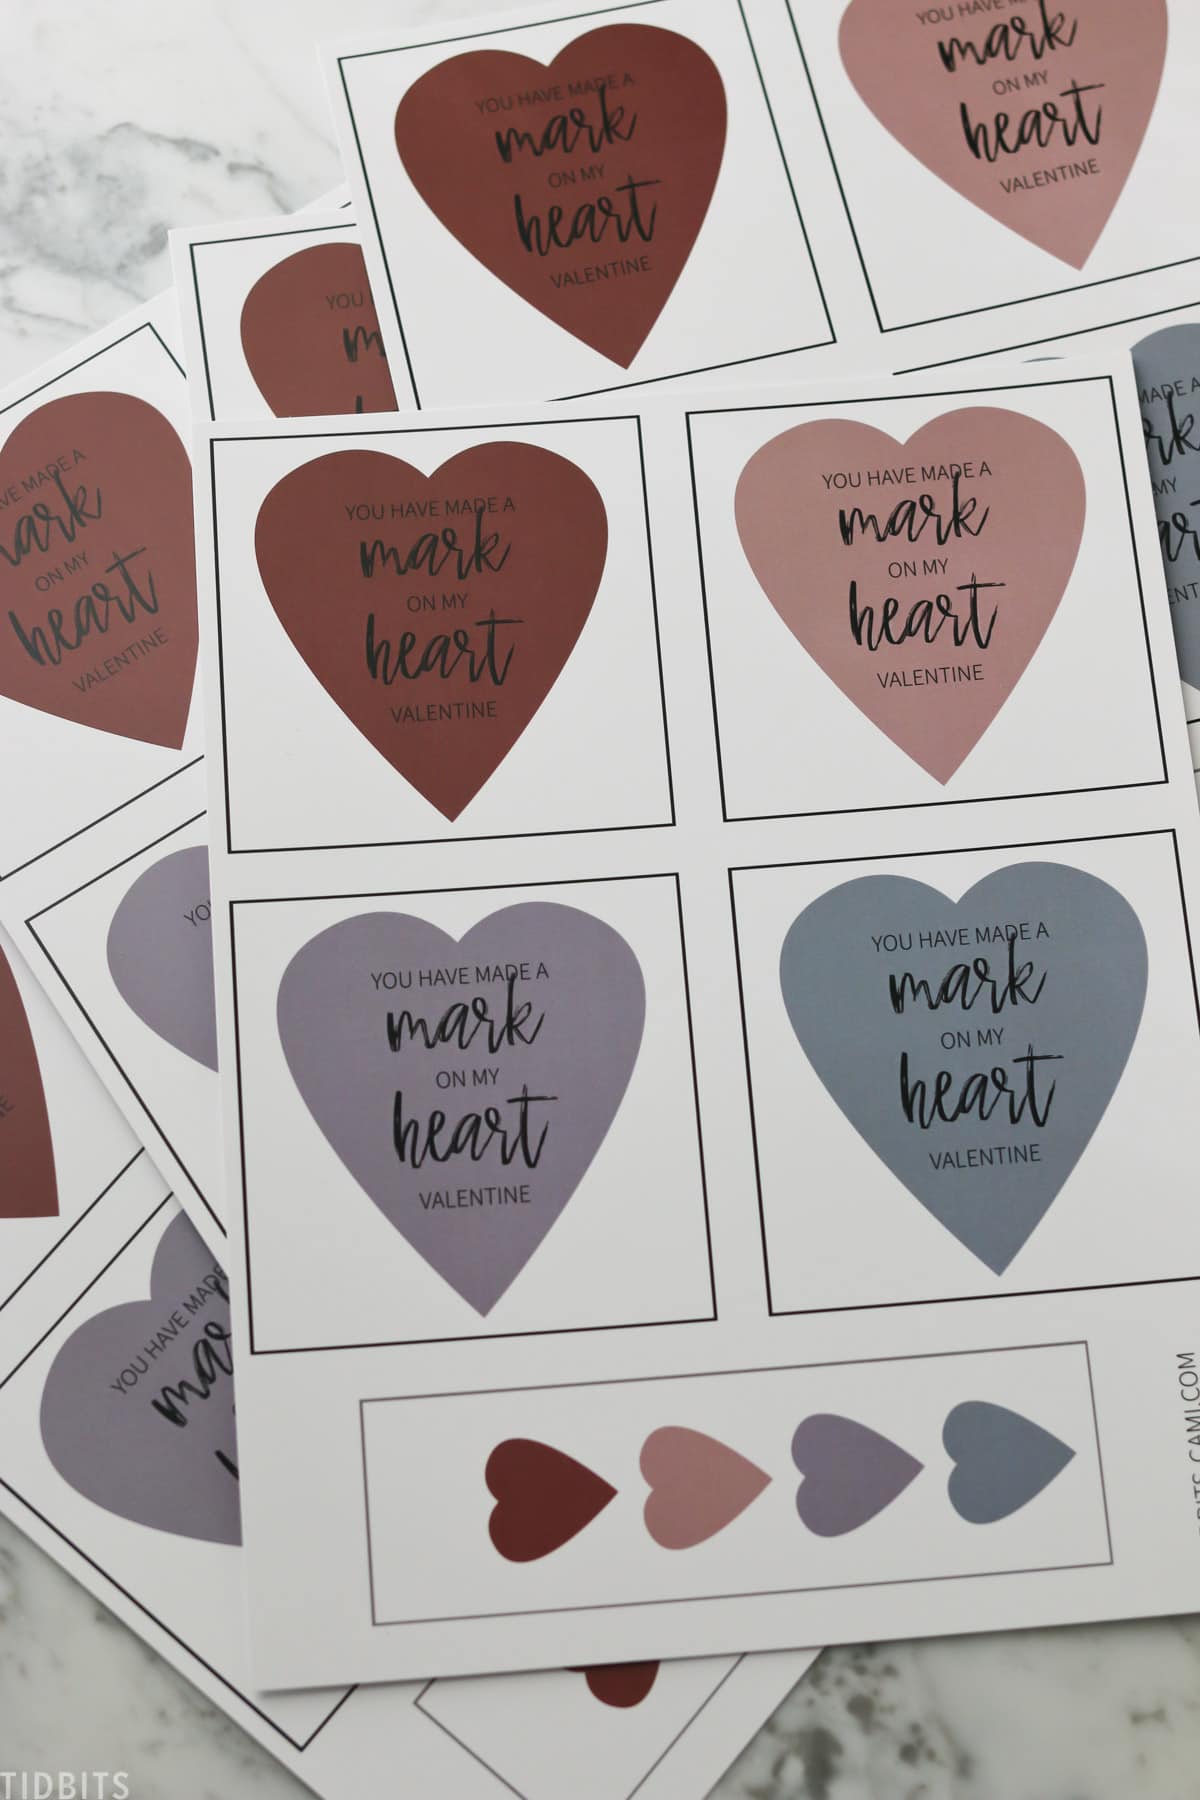 FREE valentines printables for class valentines